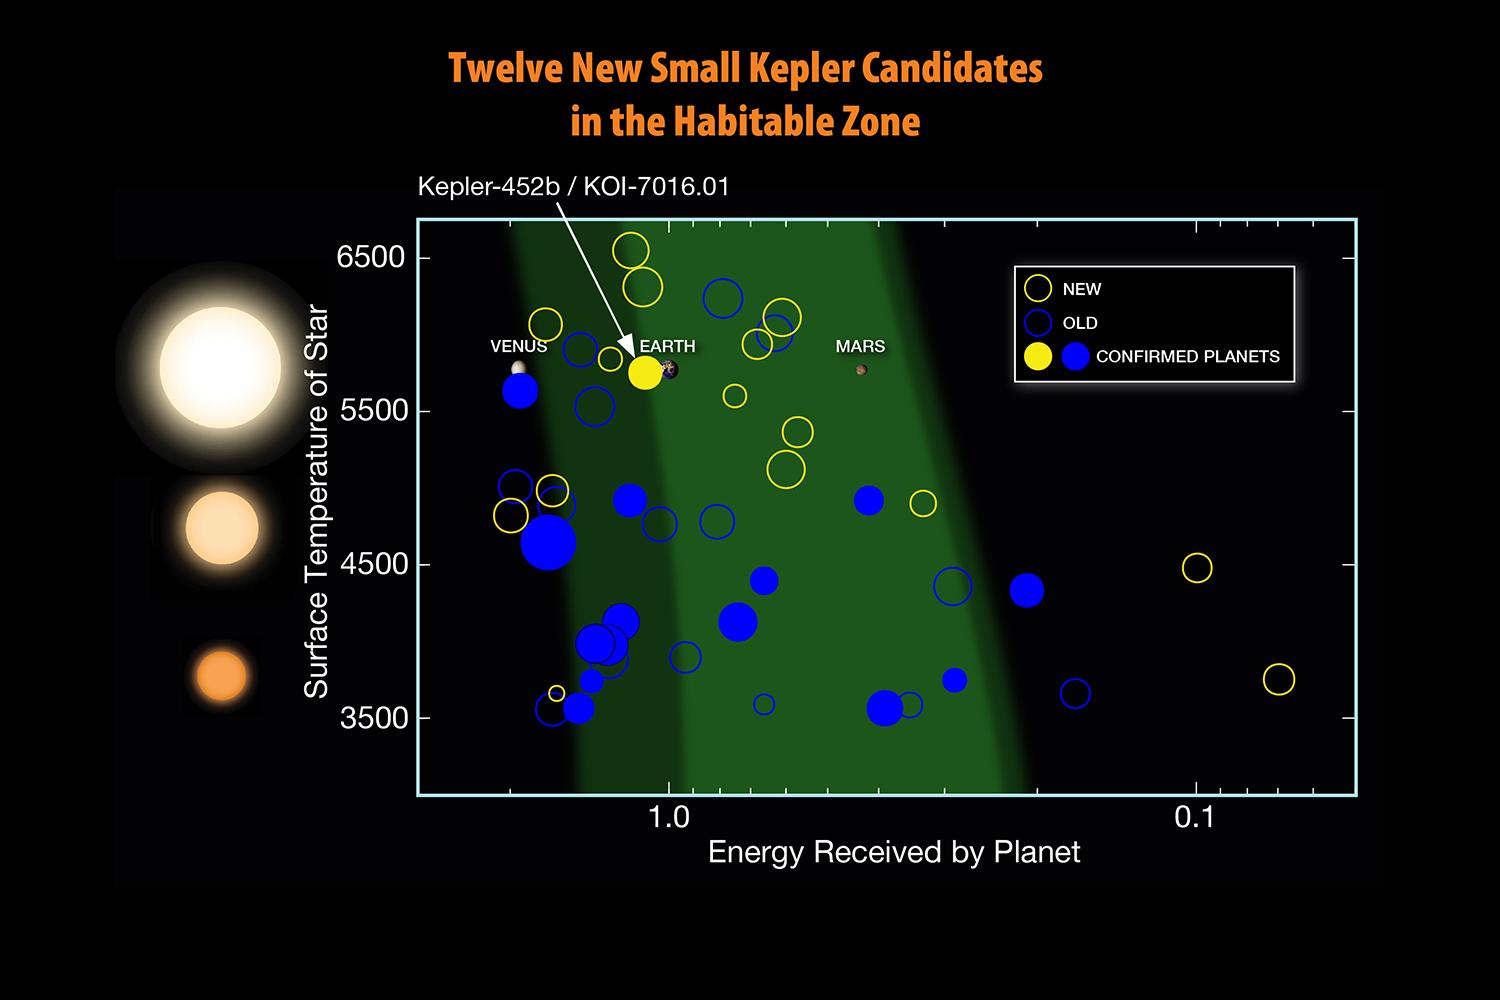 nasa announces kepler 452b exoplanet discovery fig11 12 new hz candidates